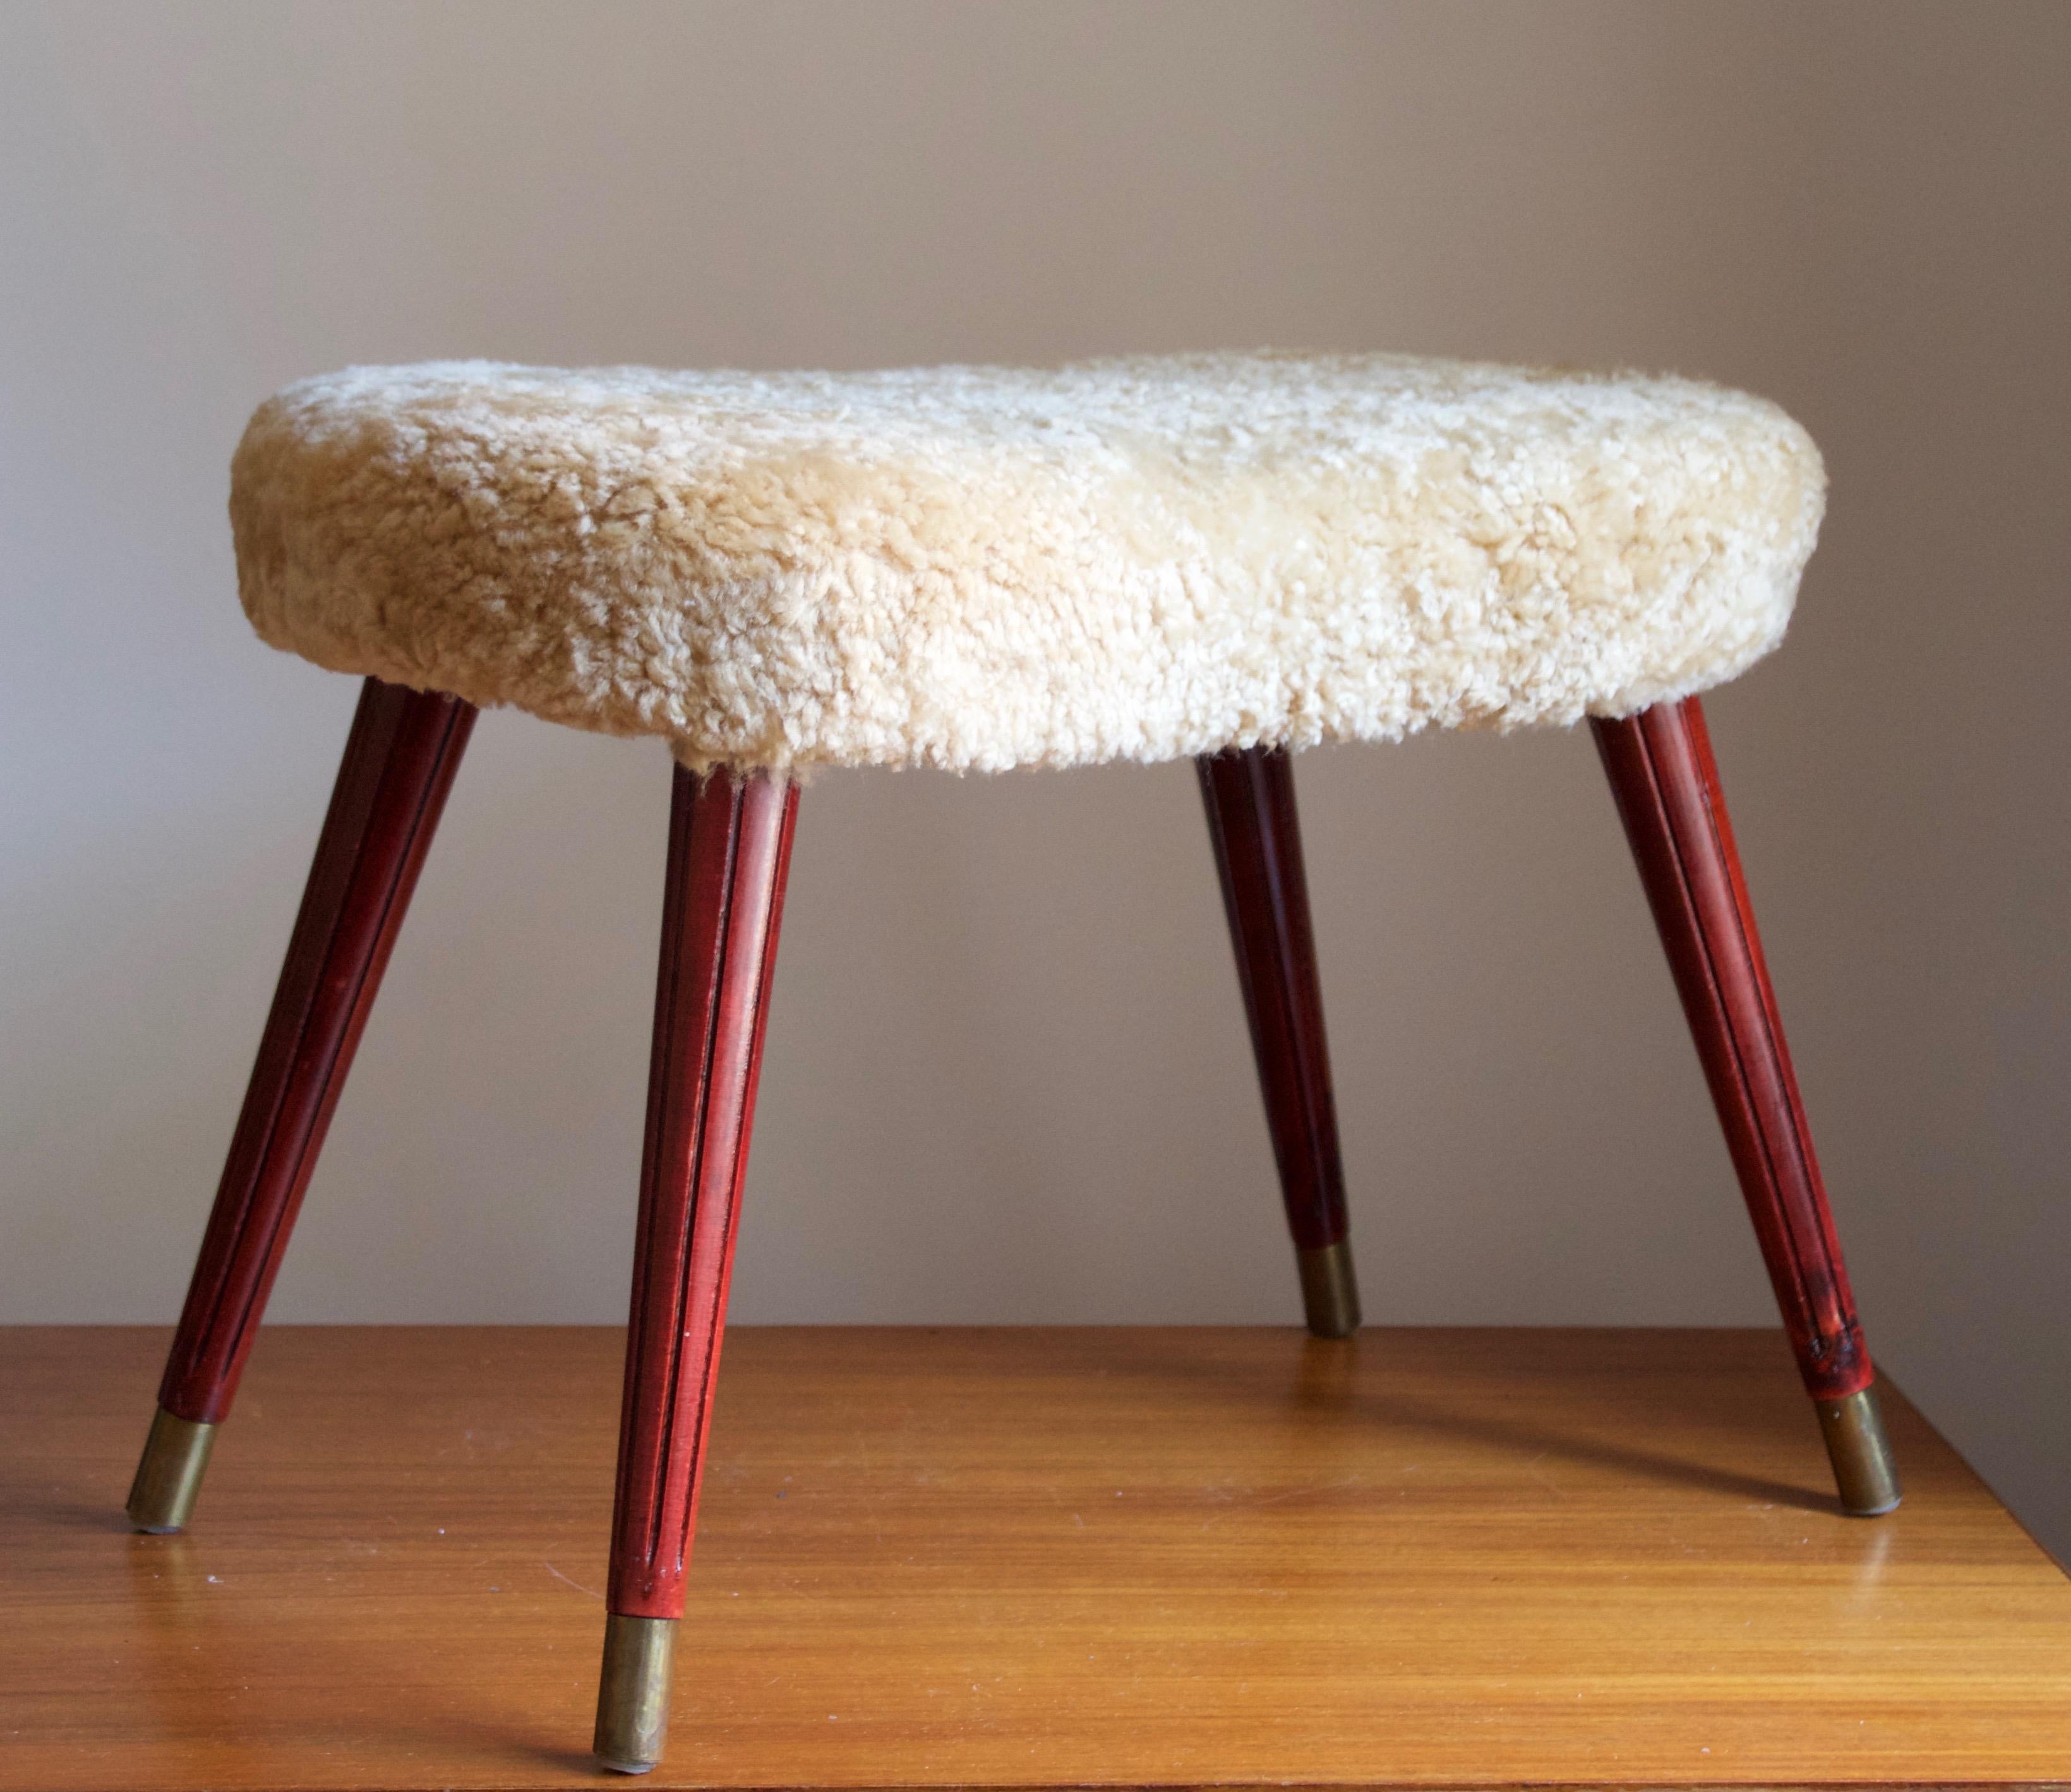 A stool in stained wood with carved fluted ornamentation, overstuffed seat reupholstered in brand new sheepskin upholstery. Produced in Sweden, 1950s.

Other designers of the period include Finn Juhl, Hans Wegner, Isamu Noguchi, Charlotte Perriand.